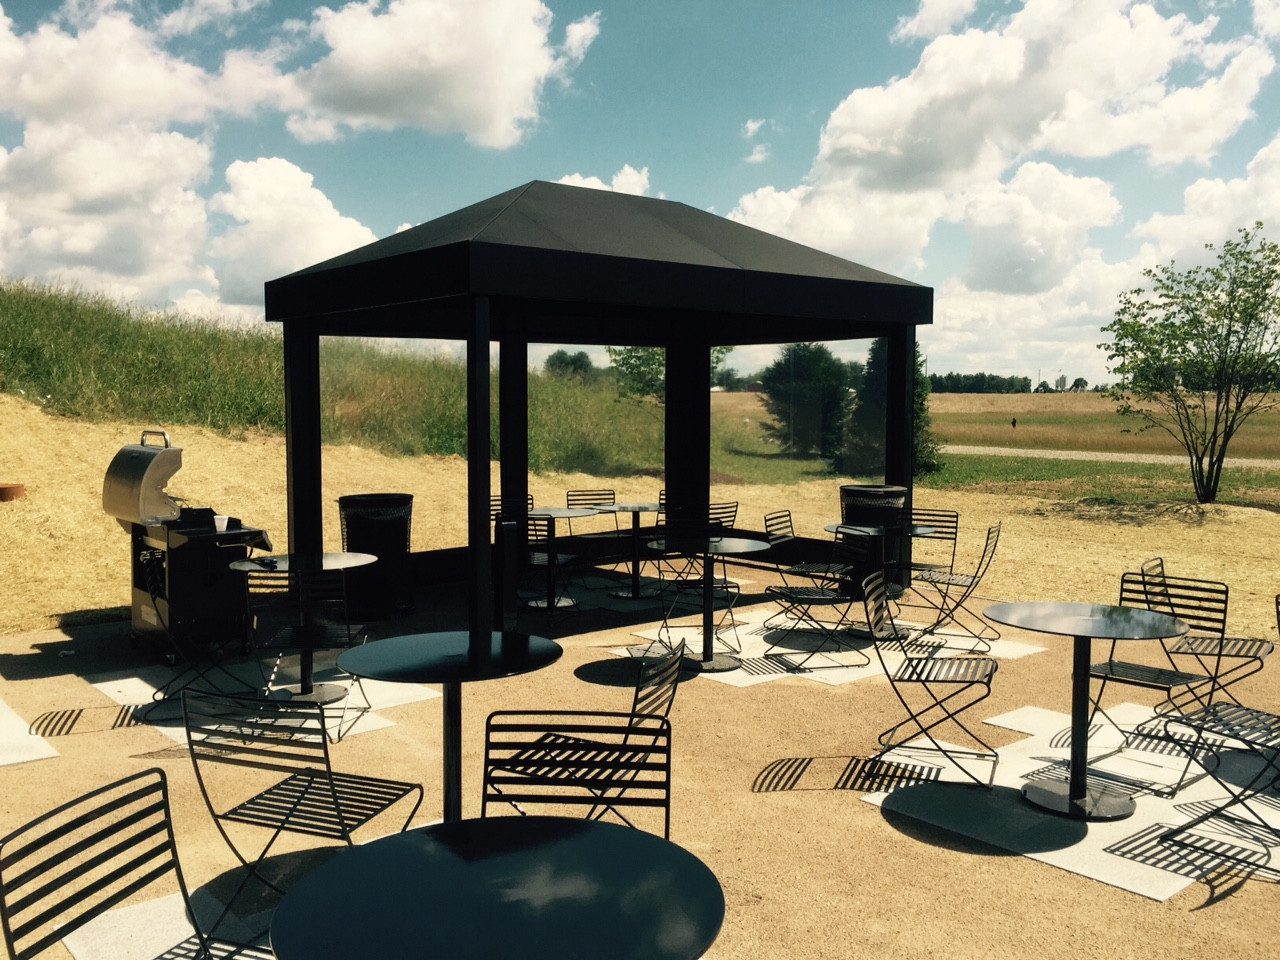 A black gazebo with tables and chairs around it.